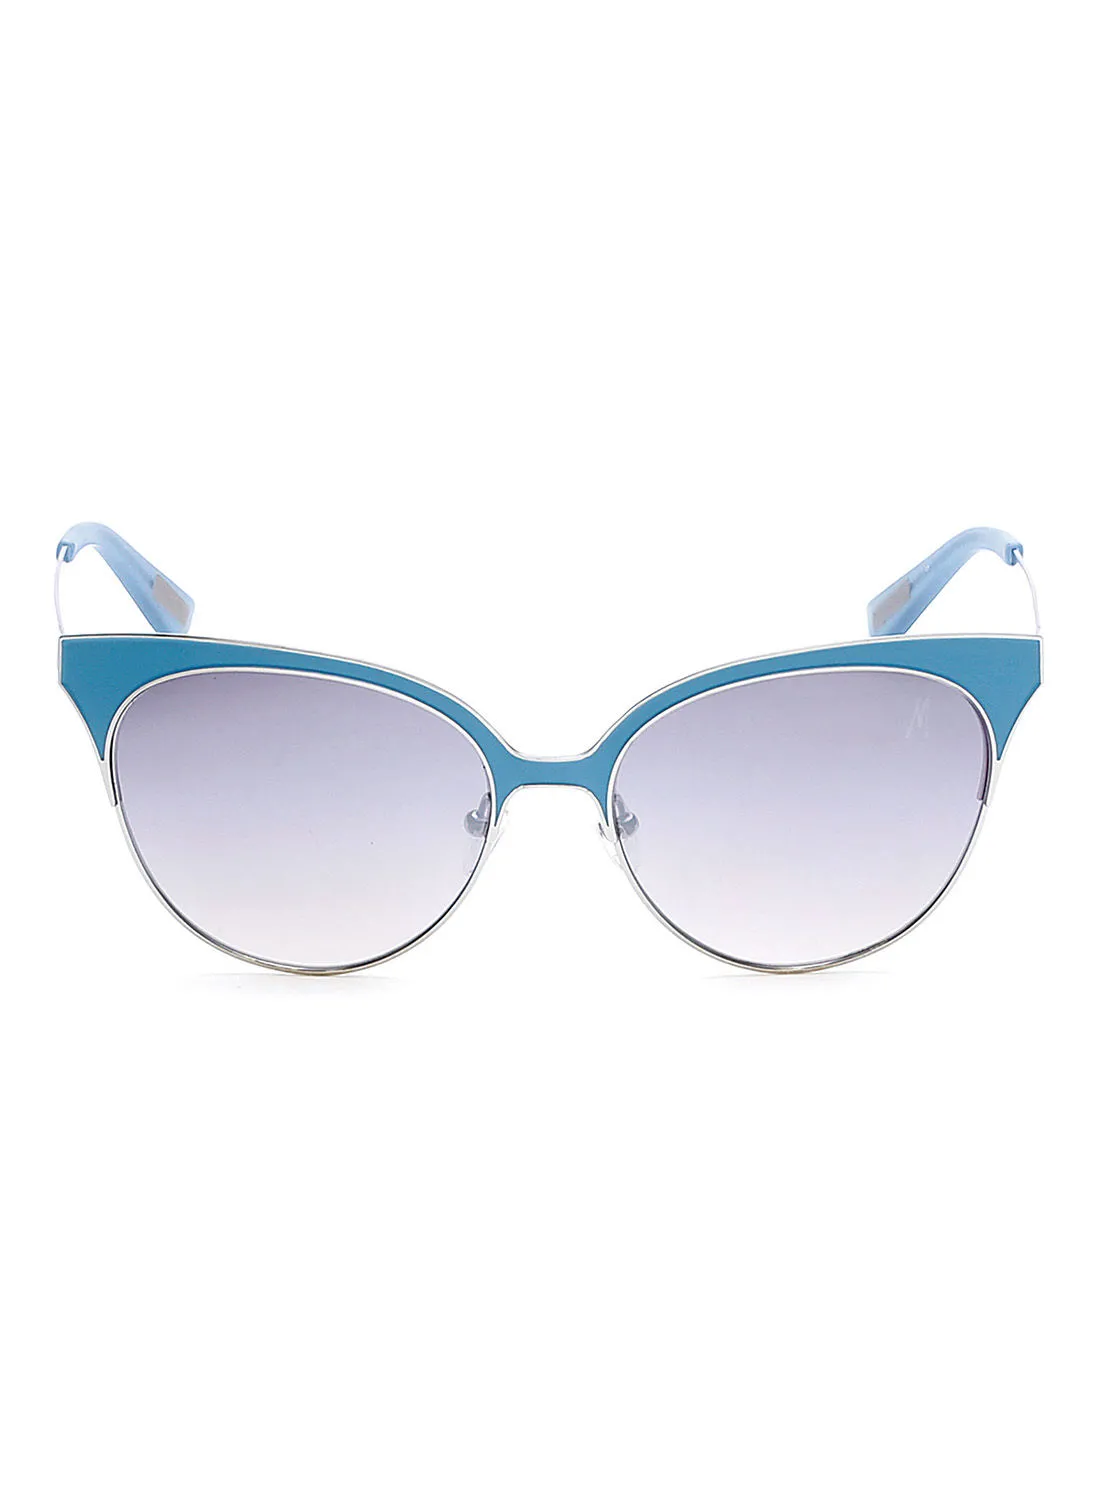 GUESS BY MARCIANO Women's UV Protection Cat Eye Sunglasses - Lens Size: 56 mm